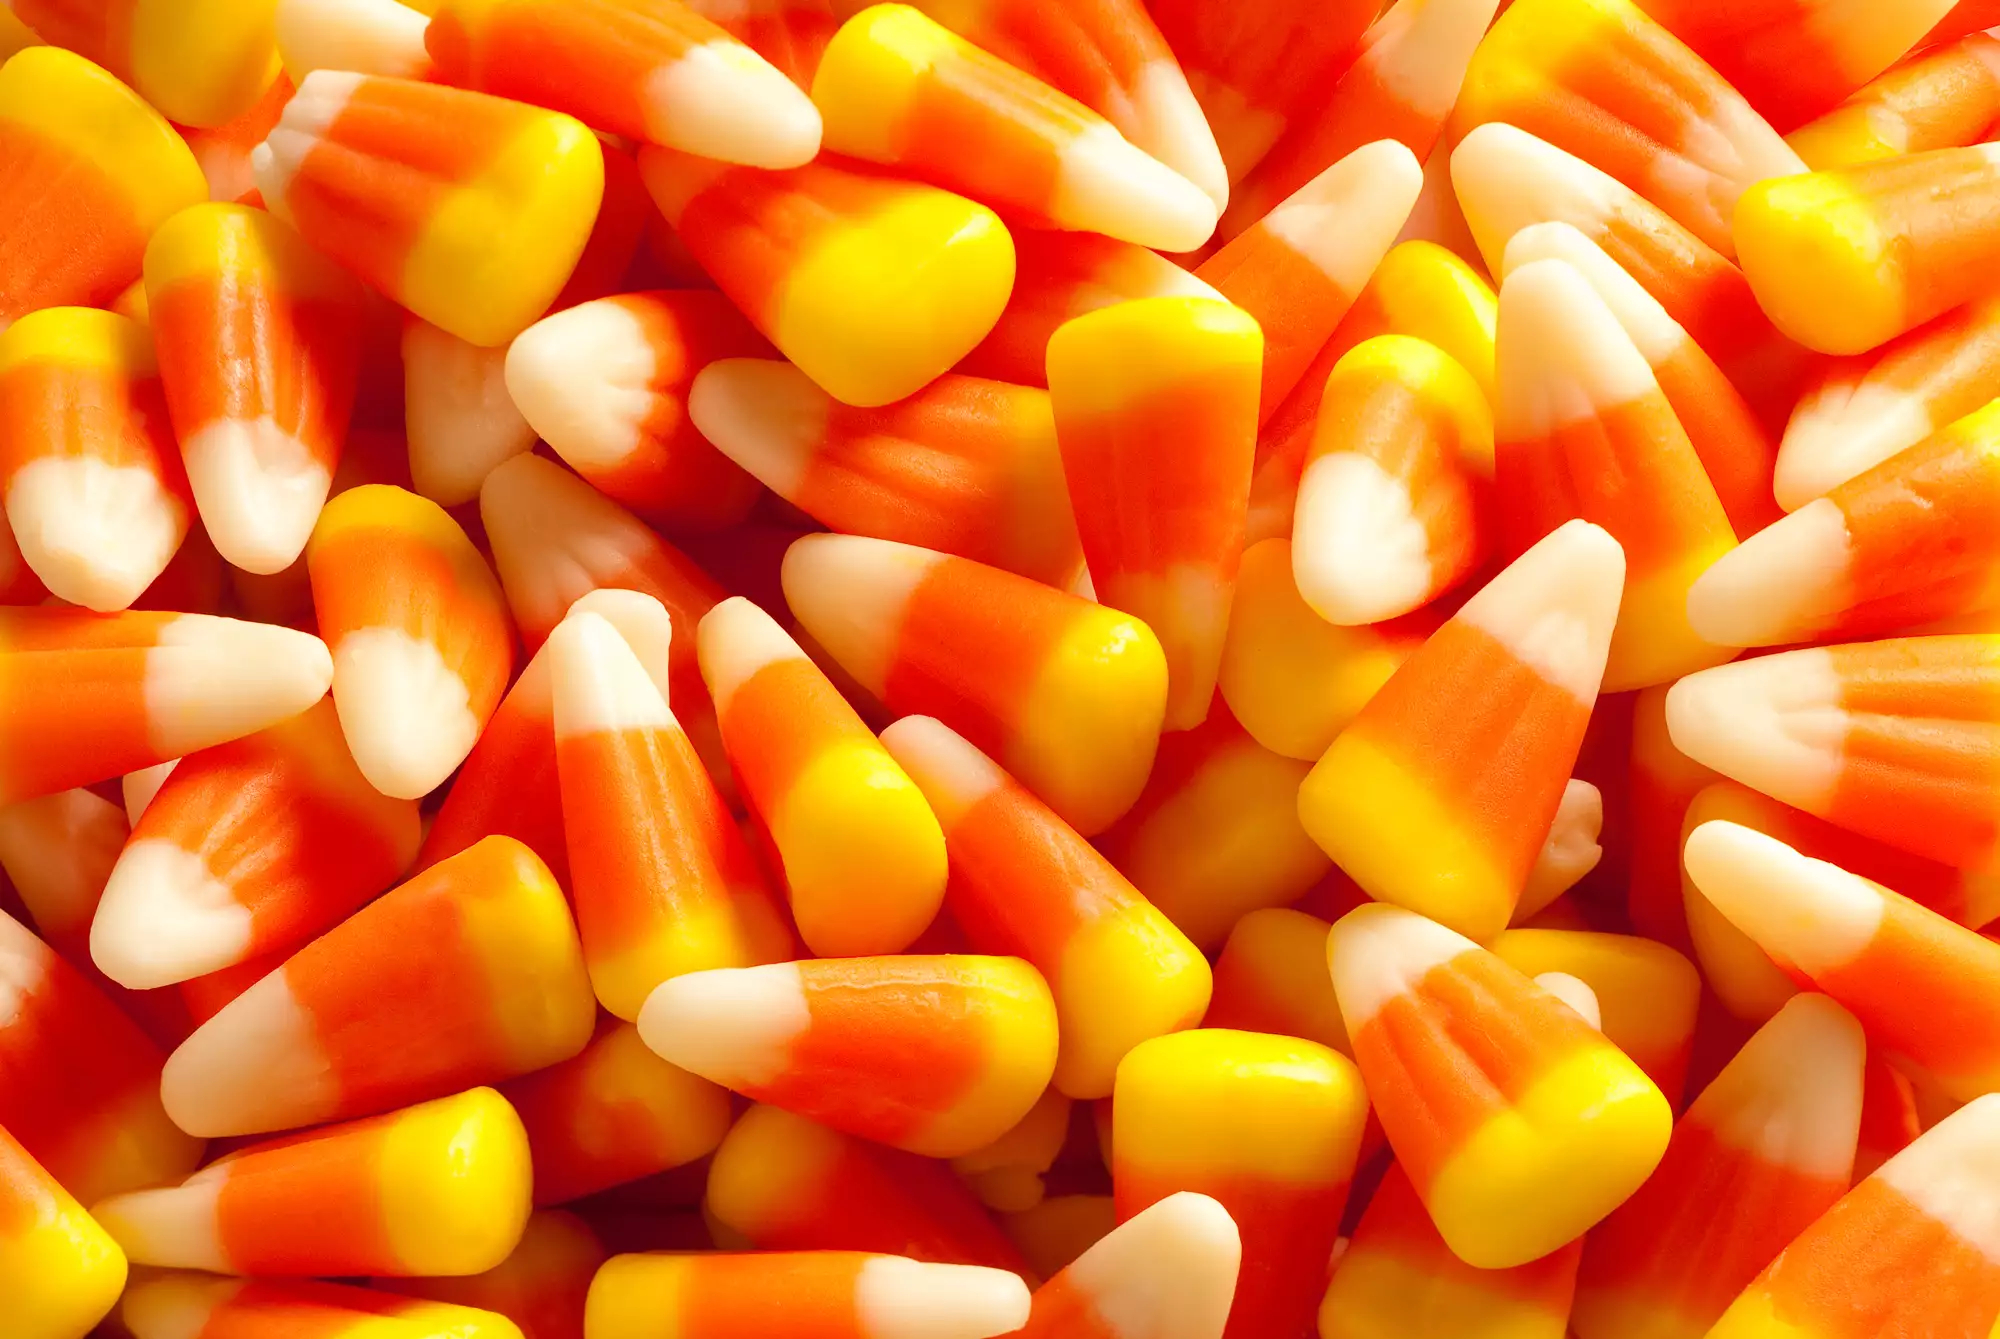 200 Candy Corn Wallpaper Stock Photos HighRes Pictures and Images   Getty Images